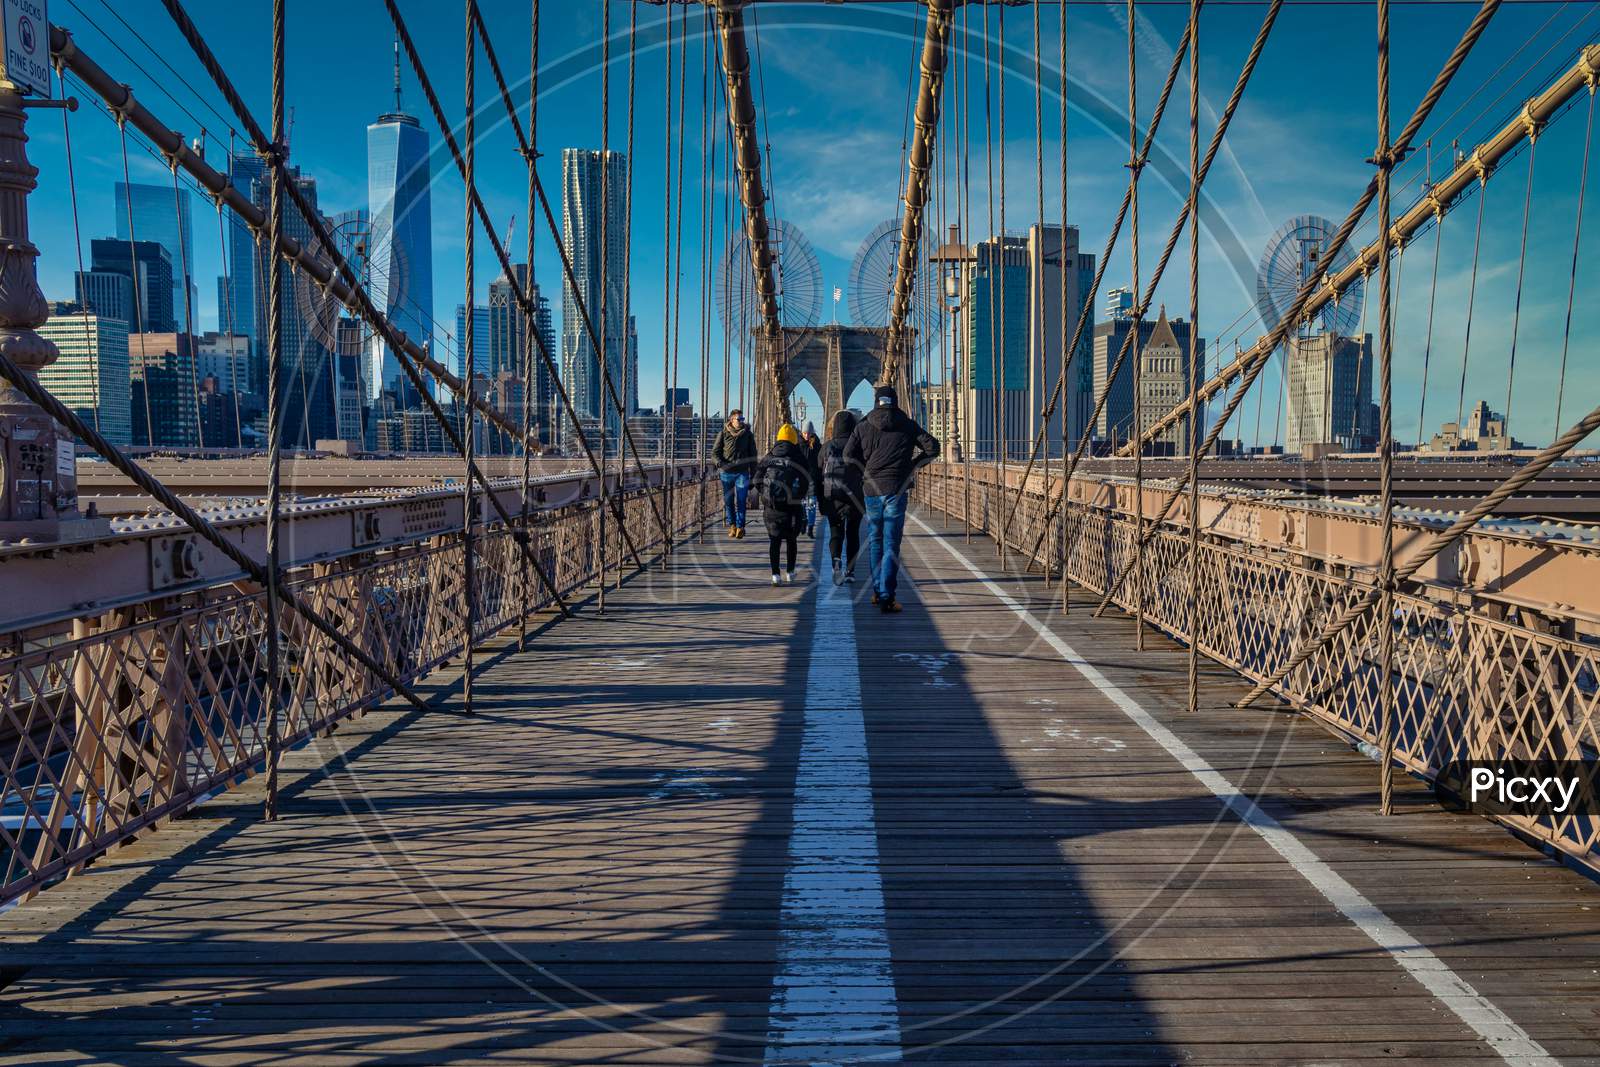 Brooklyn Bridge daylight view with people walking on the bridge ,skyline and clouds in sky in background